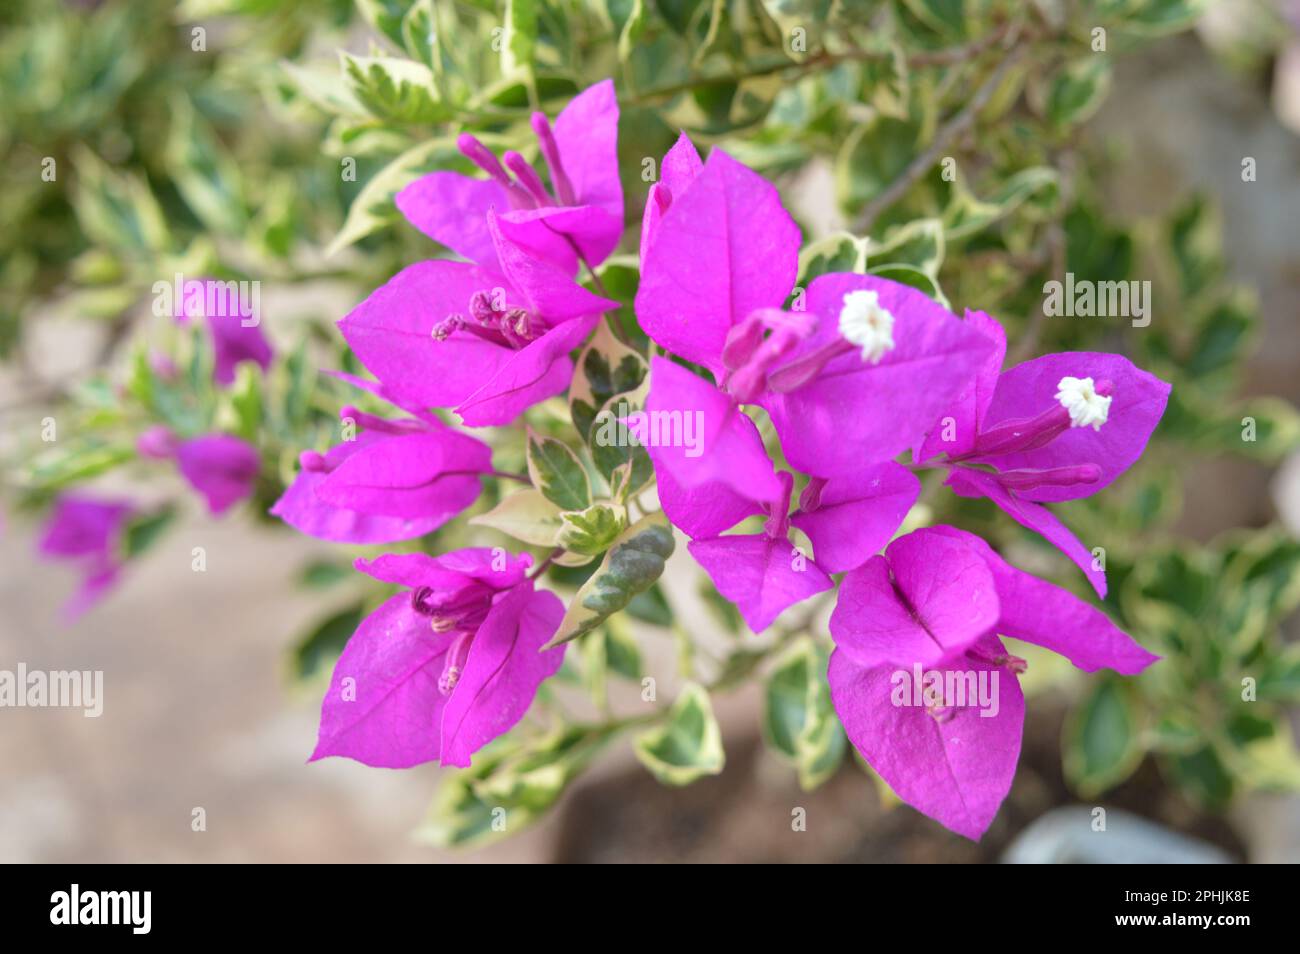 Blooming bougainvillea flowers background. Bright pink magenta bougainvillea flowers as a floral background. Bougainvillea flowers texture and backgro Stock Photo